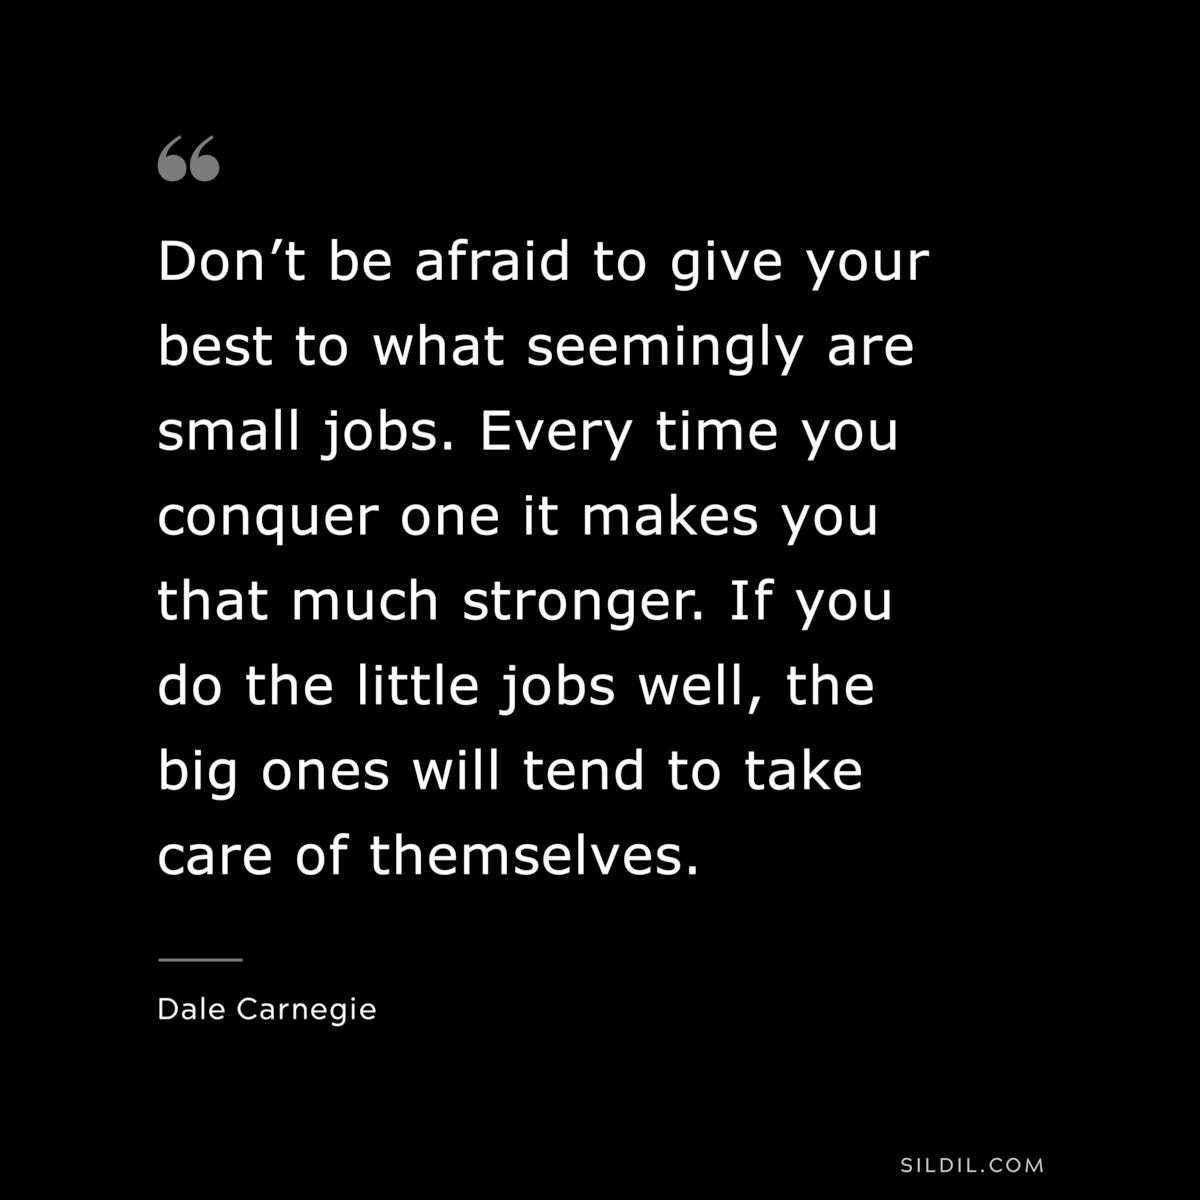 Don’t be afraid to give your best to what seemingly are small jobs. Every time you conquer one it makes you that much stronger. If you do the little jobs well, the big ones will tend to take care of themselves.― Dale Carnegie